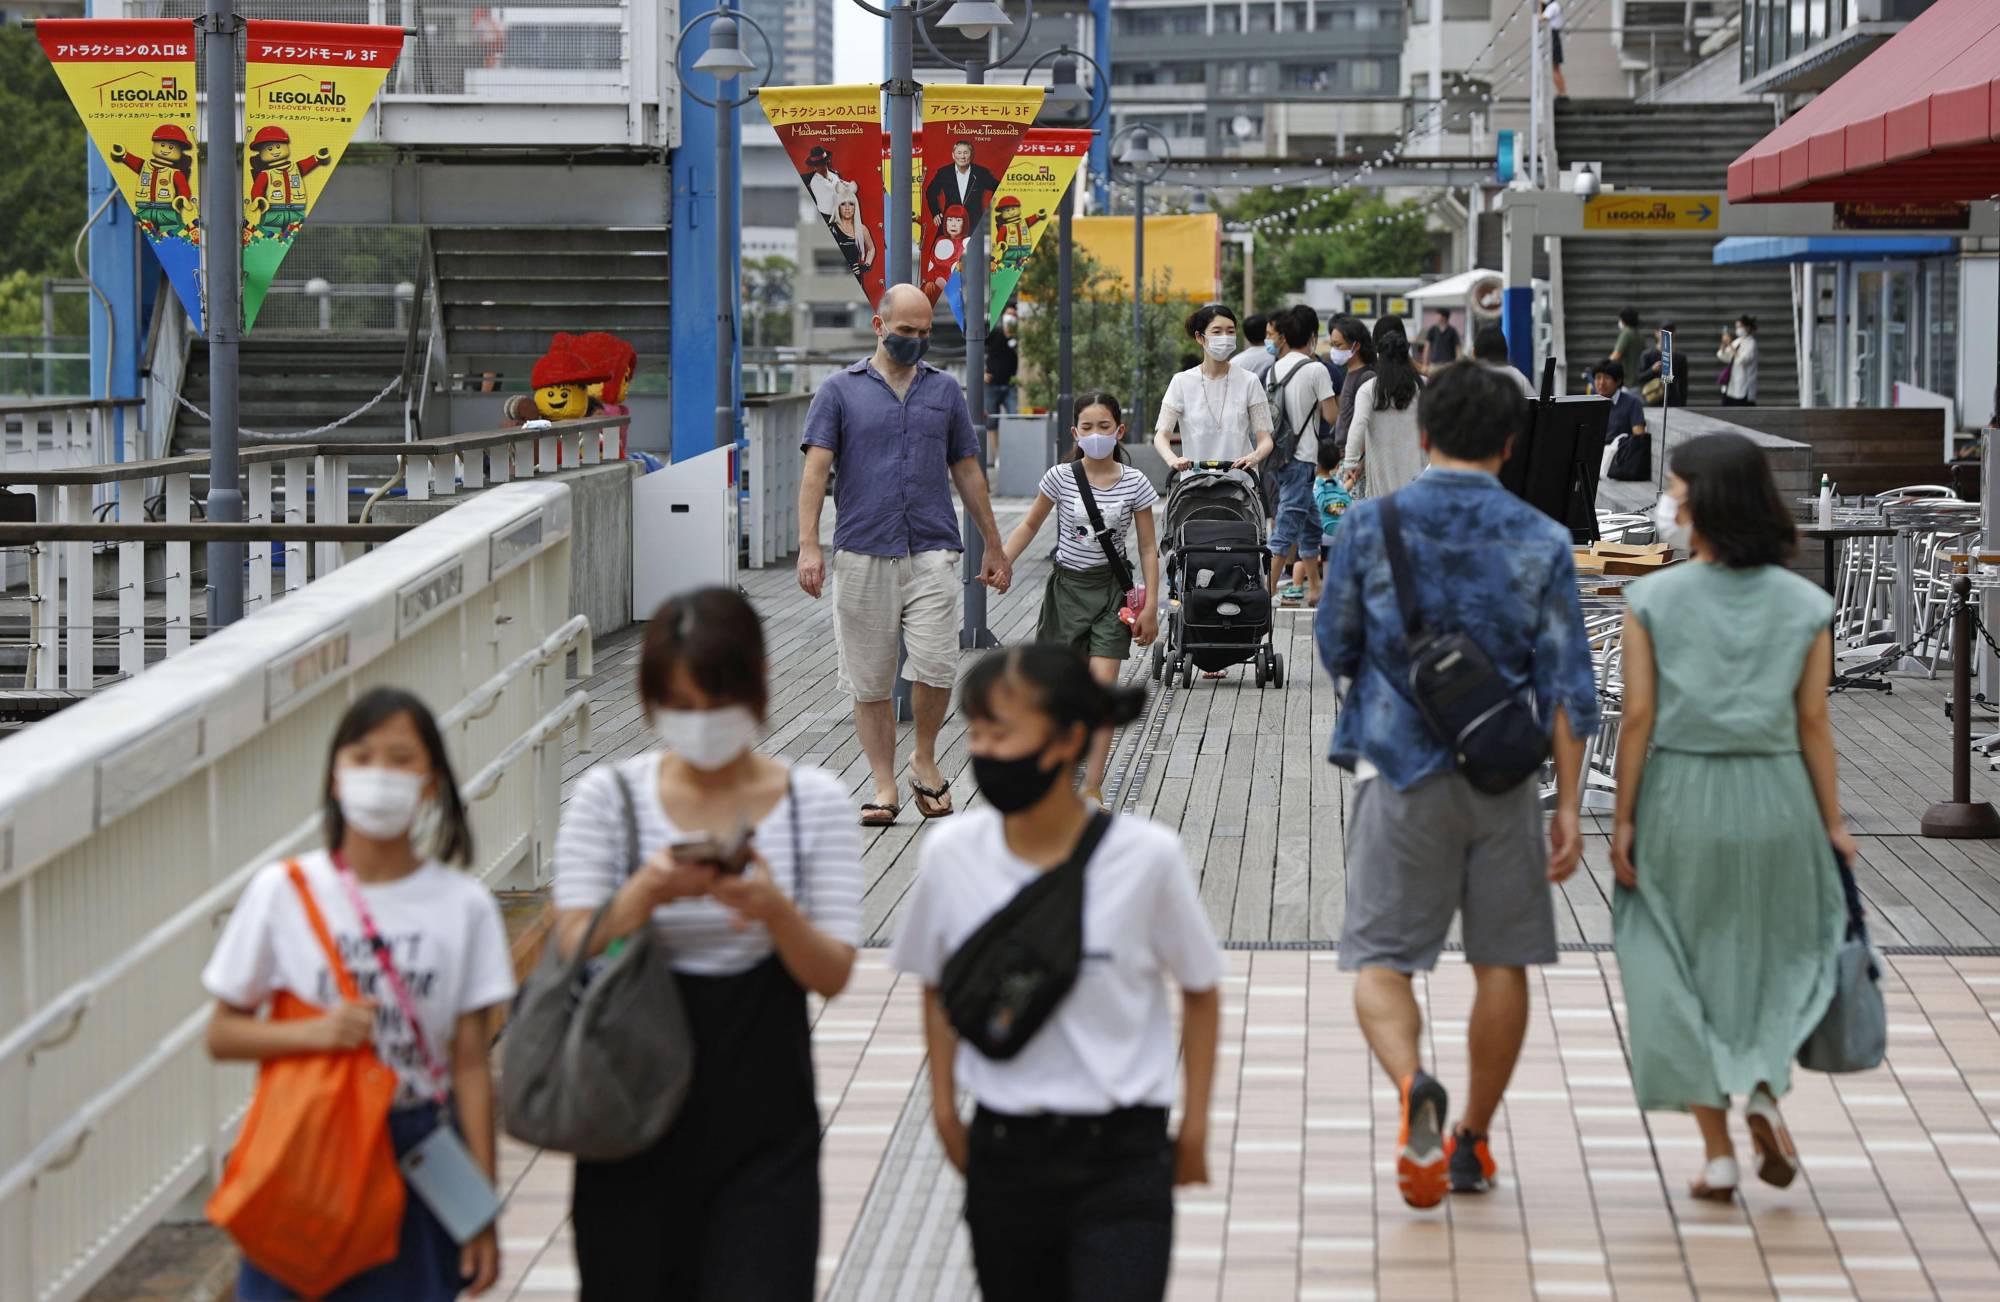 People walk in Tokyo's Odaiba district on Saturday. | KYODO